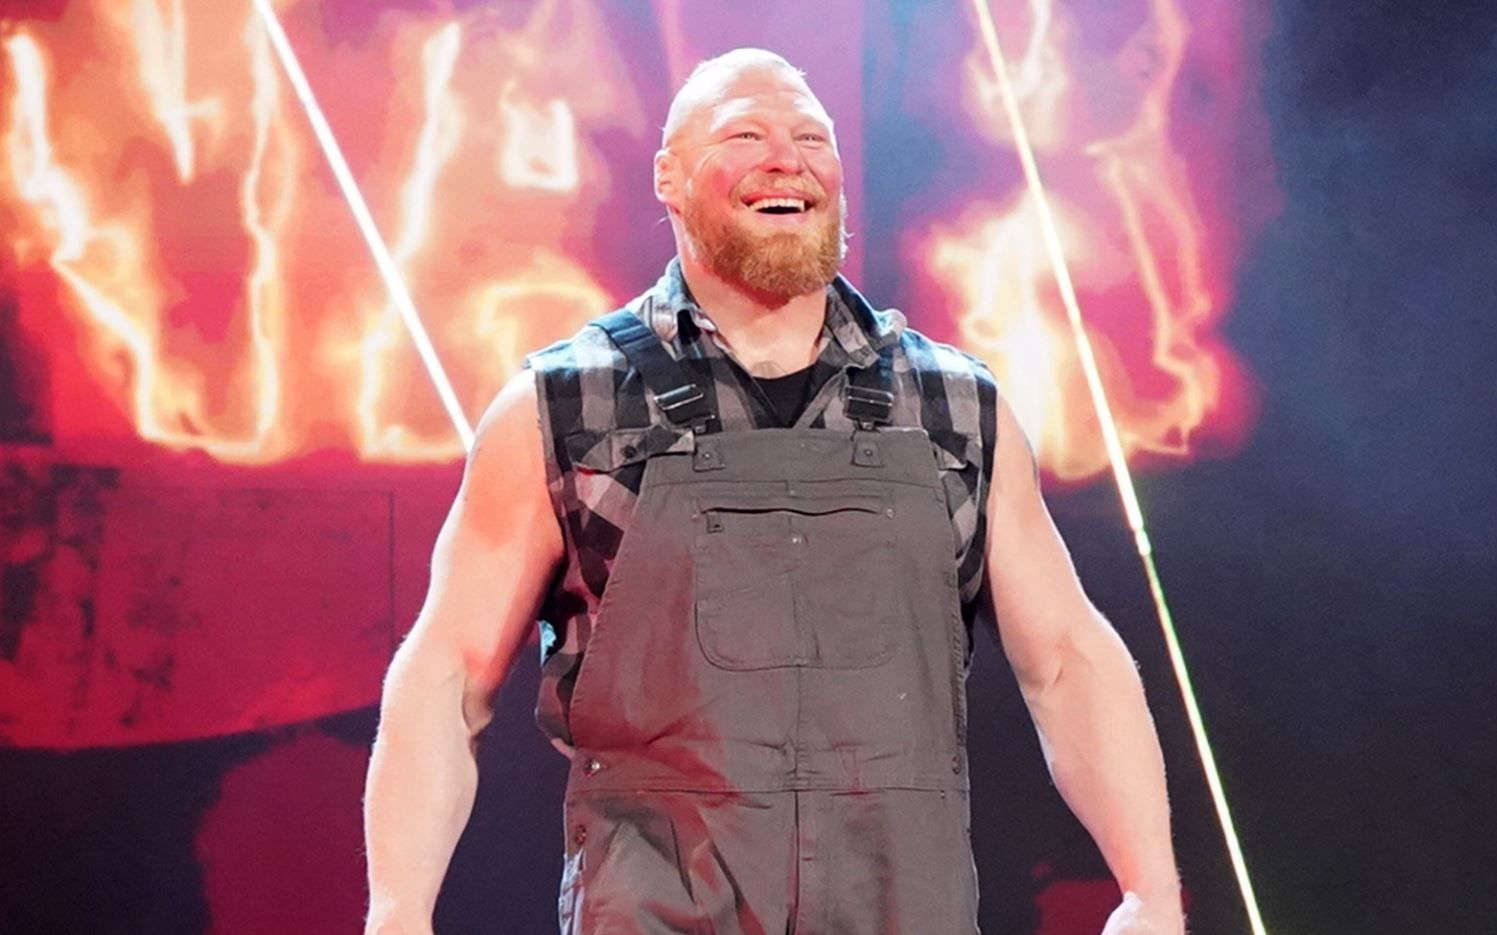 Brock Lesnar was in his overalls on SmackDown this week